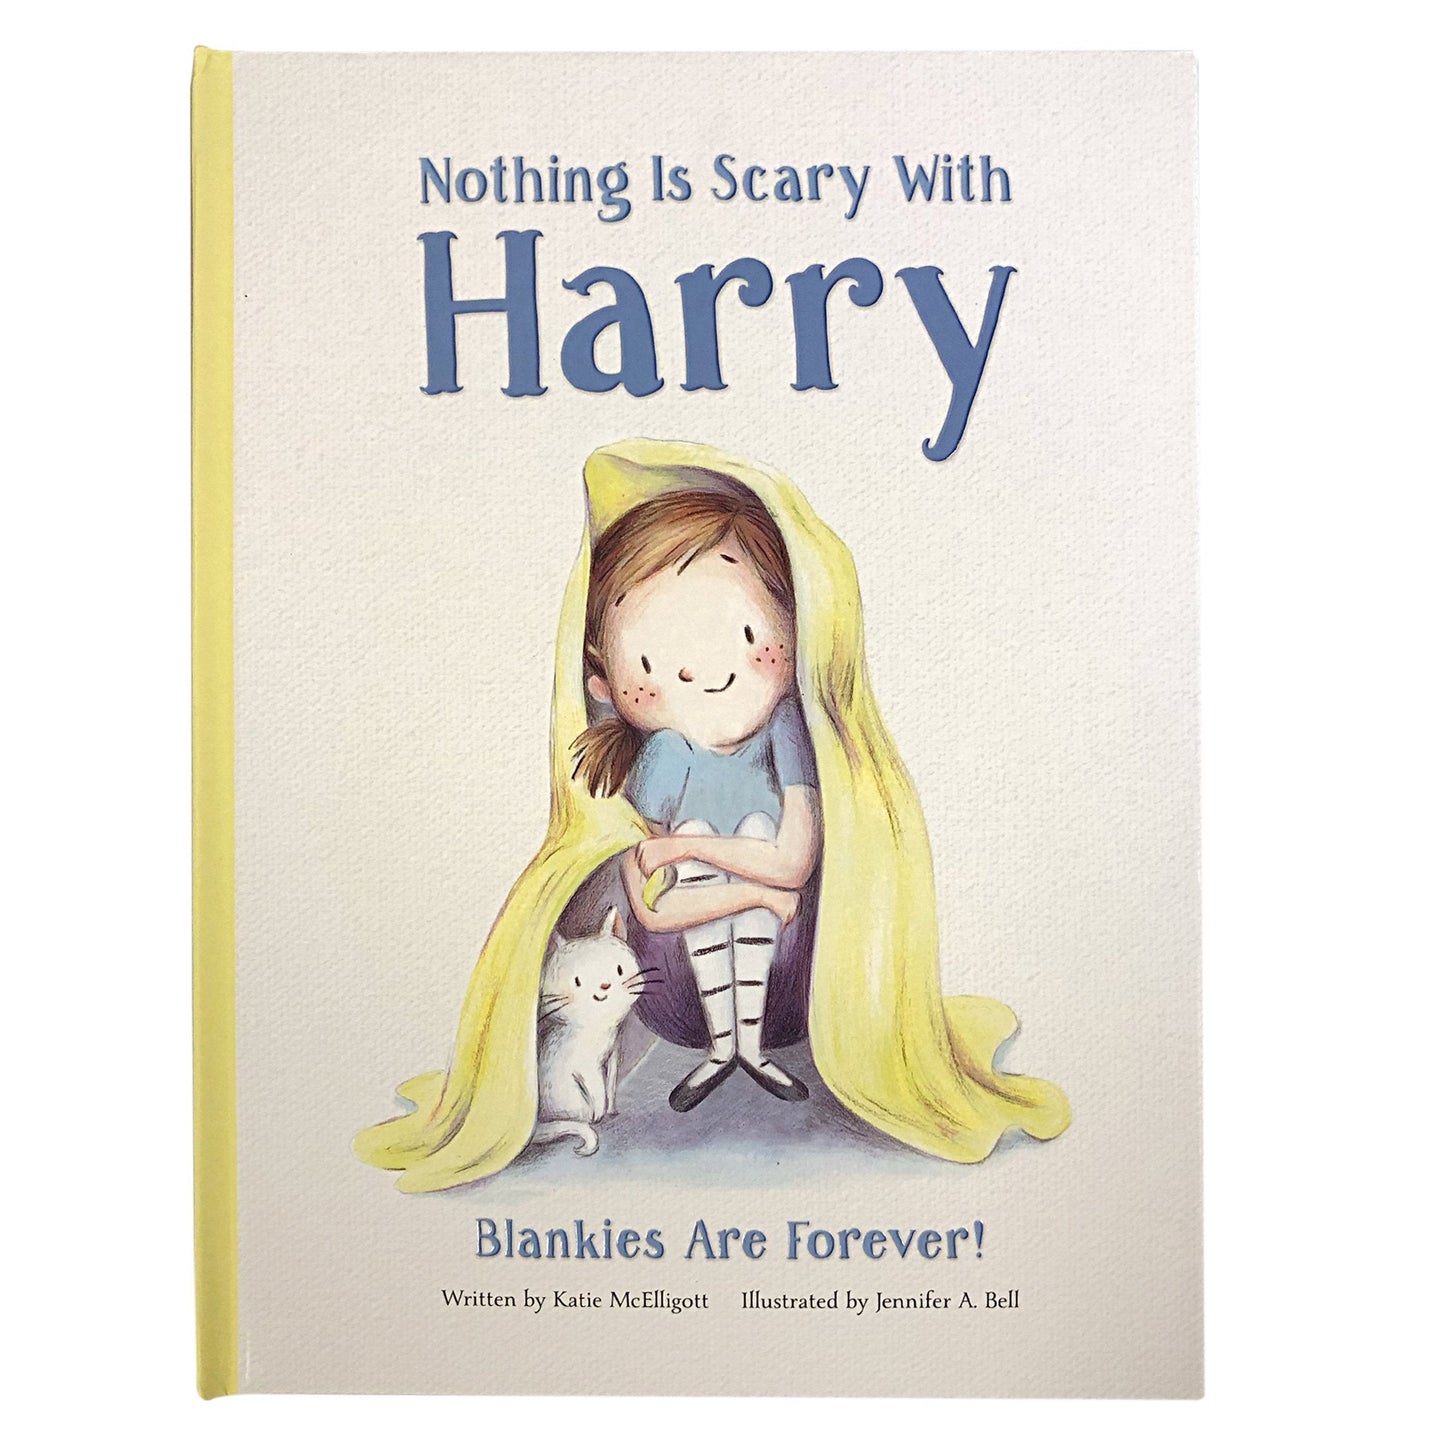 Nothing Is Scary With Harry